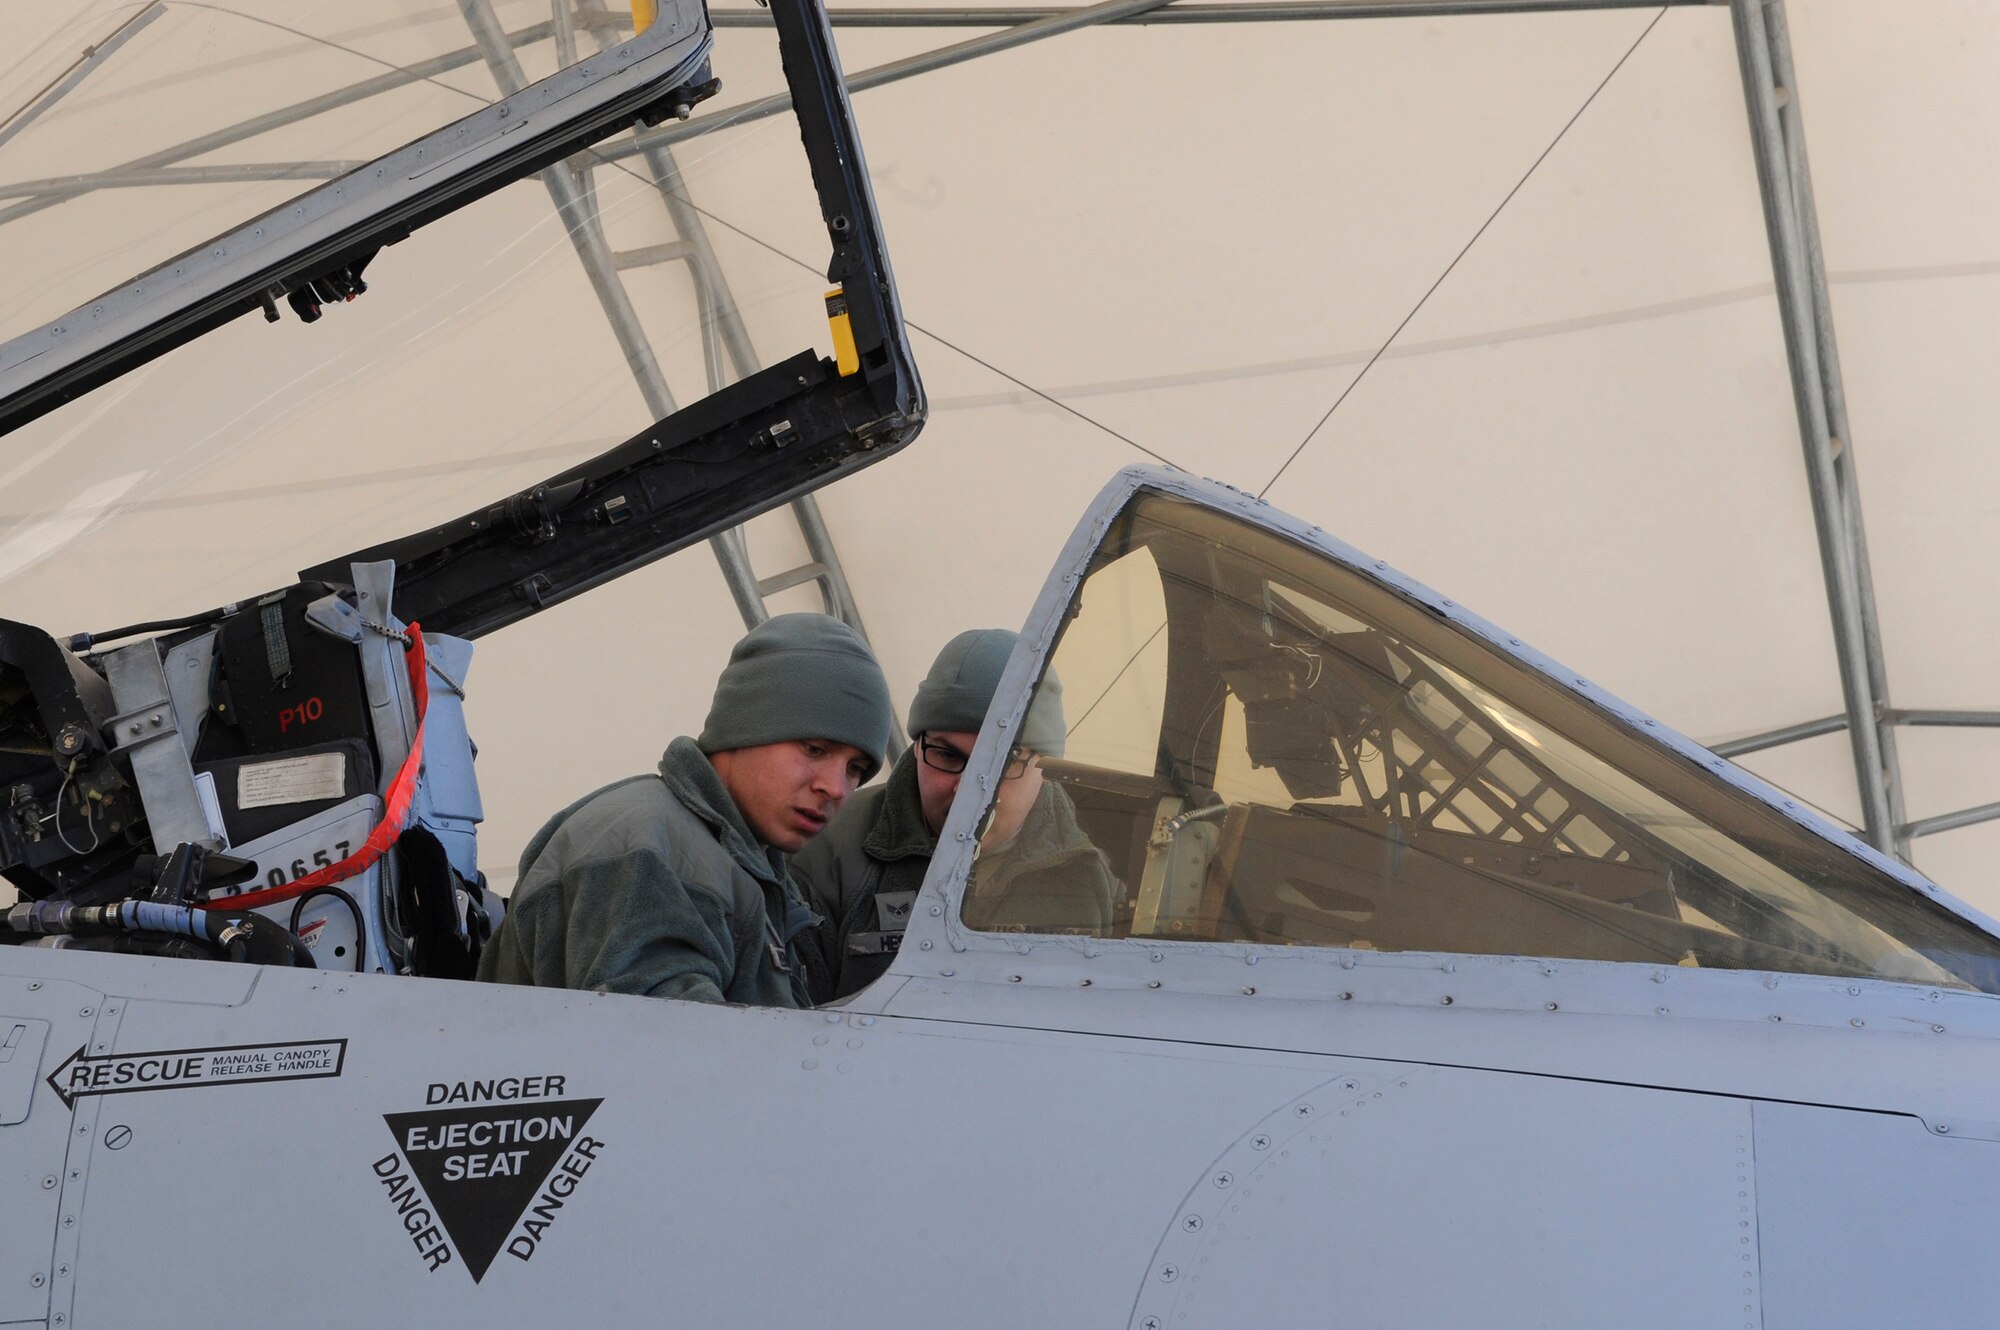 U.S. Air Force Airman 1st Class Chris Renfroe, 74th Aircraft Maintenance Unit crew chief, left, and Senior Airman Tyler Hester, 476th Maintenance Squadron crew chief, prepare an A-10C Thunderbolt II cockpit prior to a flight, Jan. 5, 2016, at Moody Air Force Base, Ga. When performing aircraft launches, crew chiefs prepare aircraft and their pilots for flight. (U.S. Air Force photo by Airman 1st Class Kathleen D. Bryant/Released)
